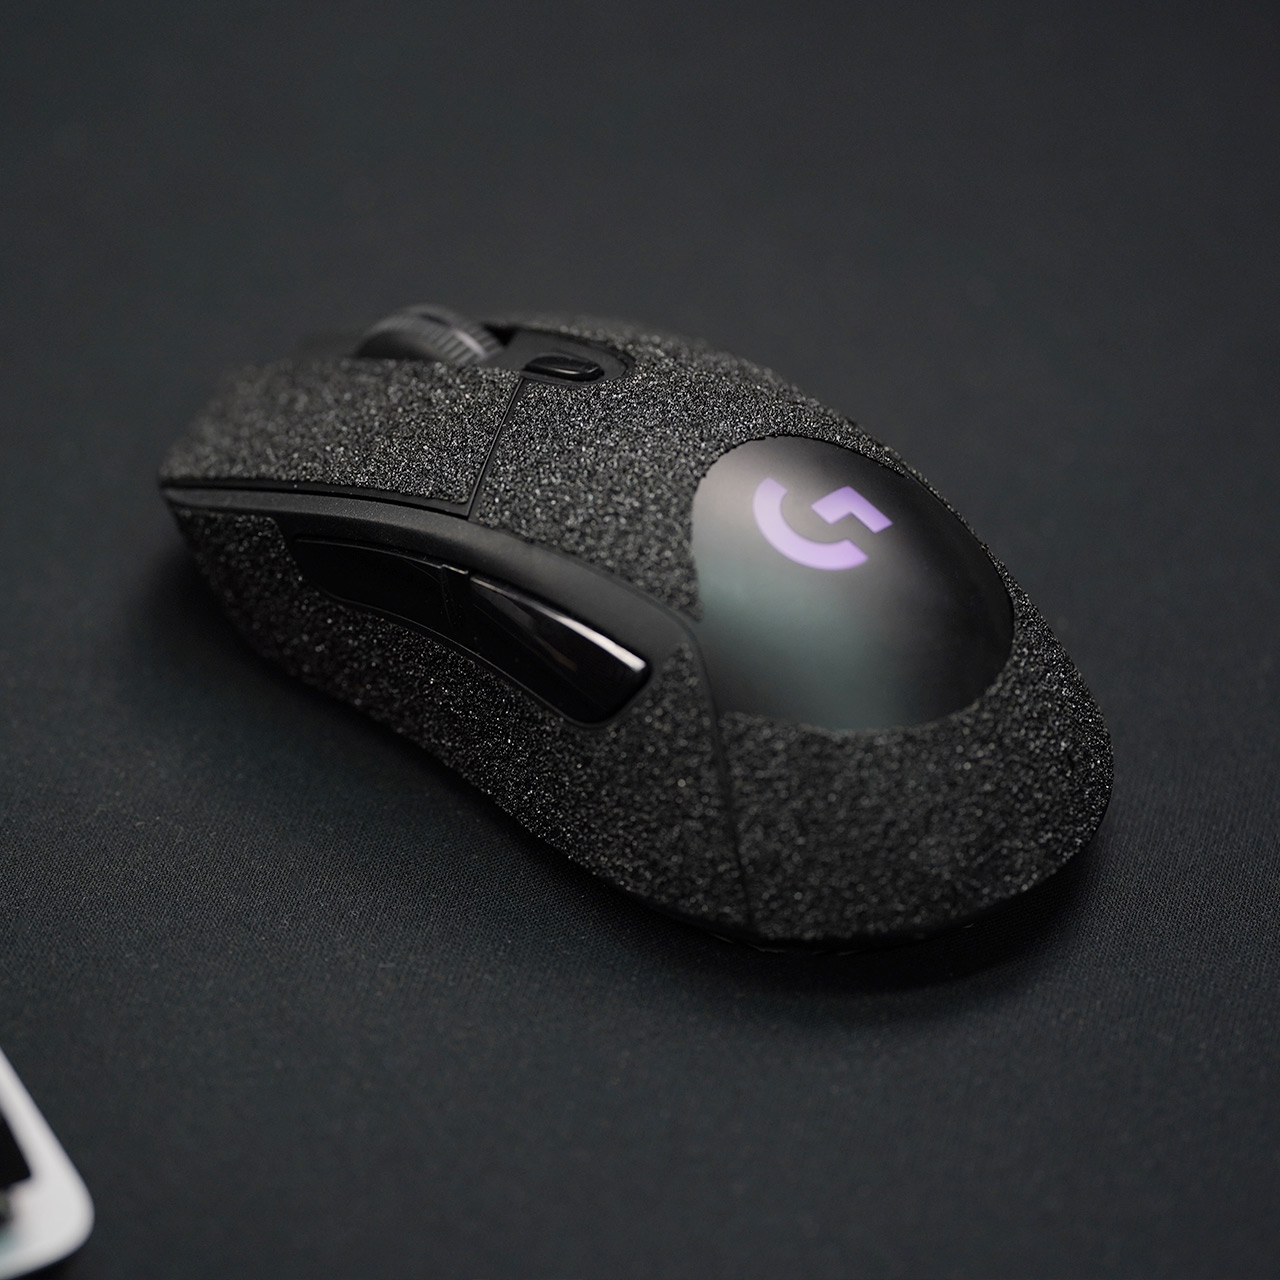 Logitech G703 Antgrip • Antgrip - Upgrade your gaming mouse.